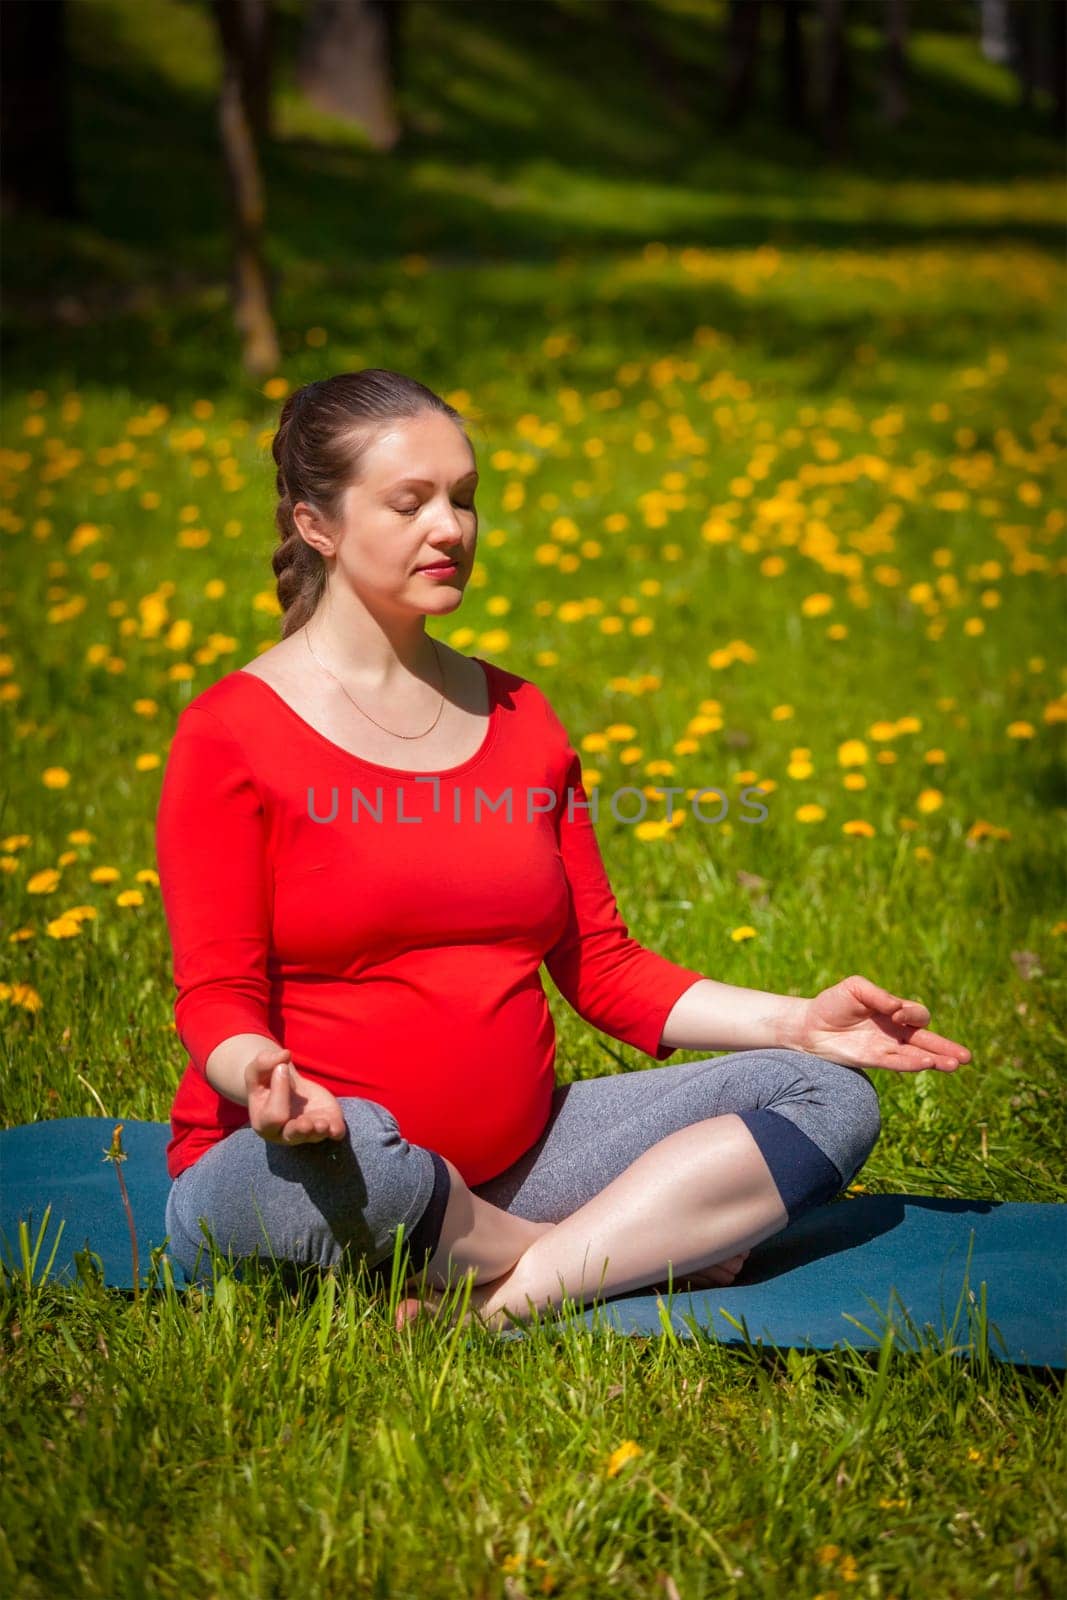 Pregnancy yoga exercise - pregnant woman meditating in yoga asana Sukhasana easy yoga pose with chin mudra outdoors on grass lawn with dandelions in summer